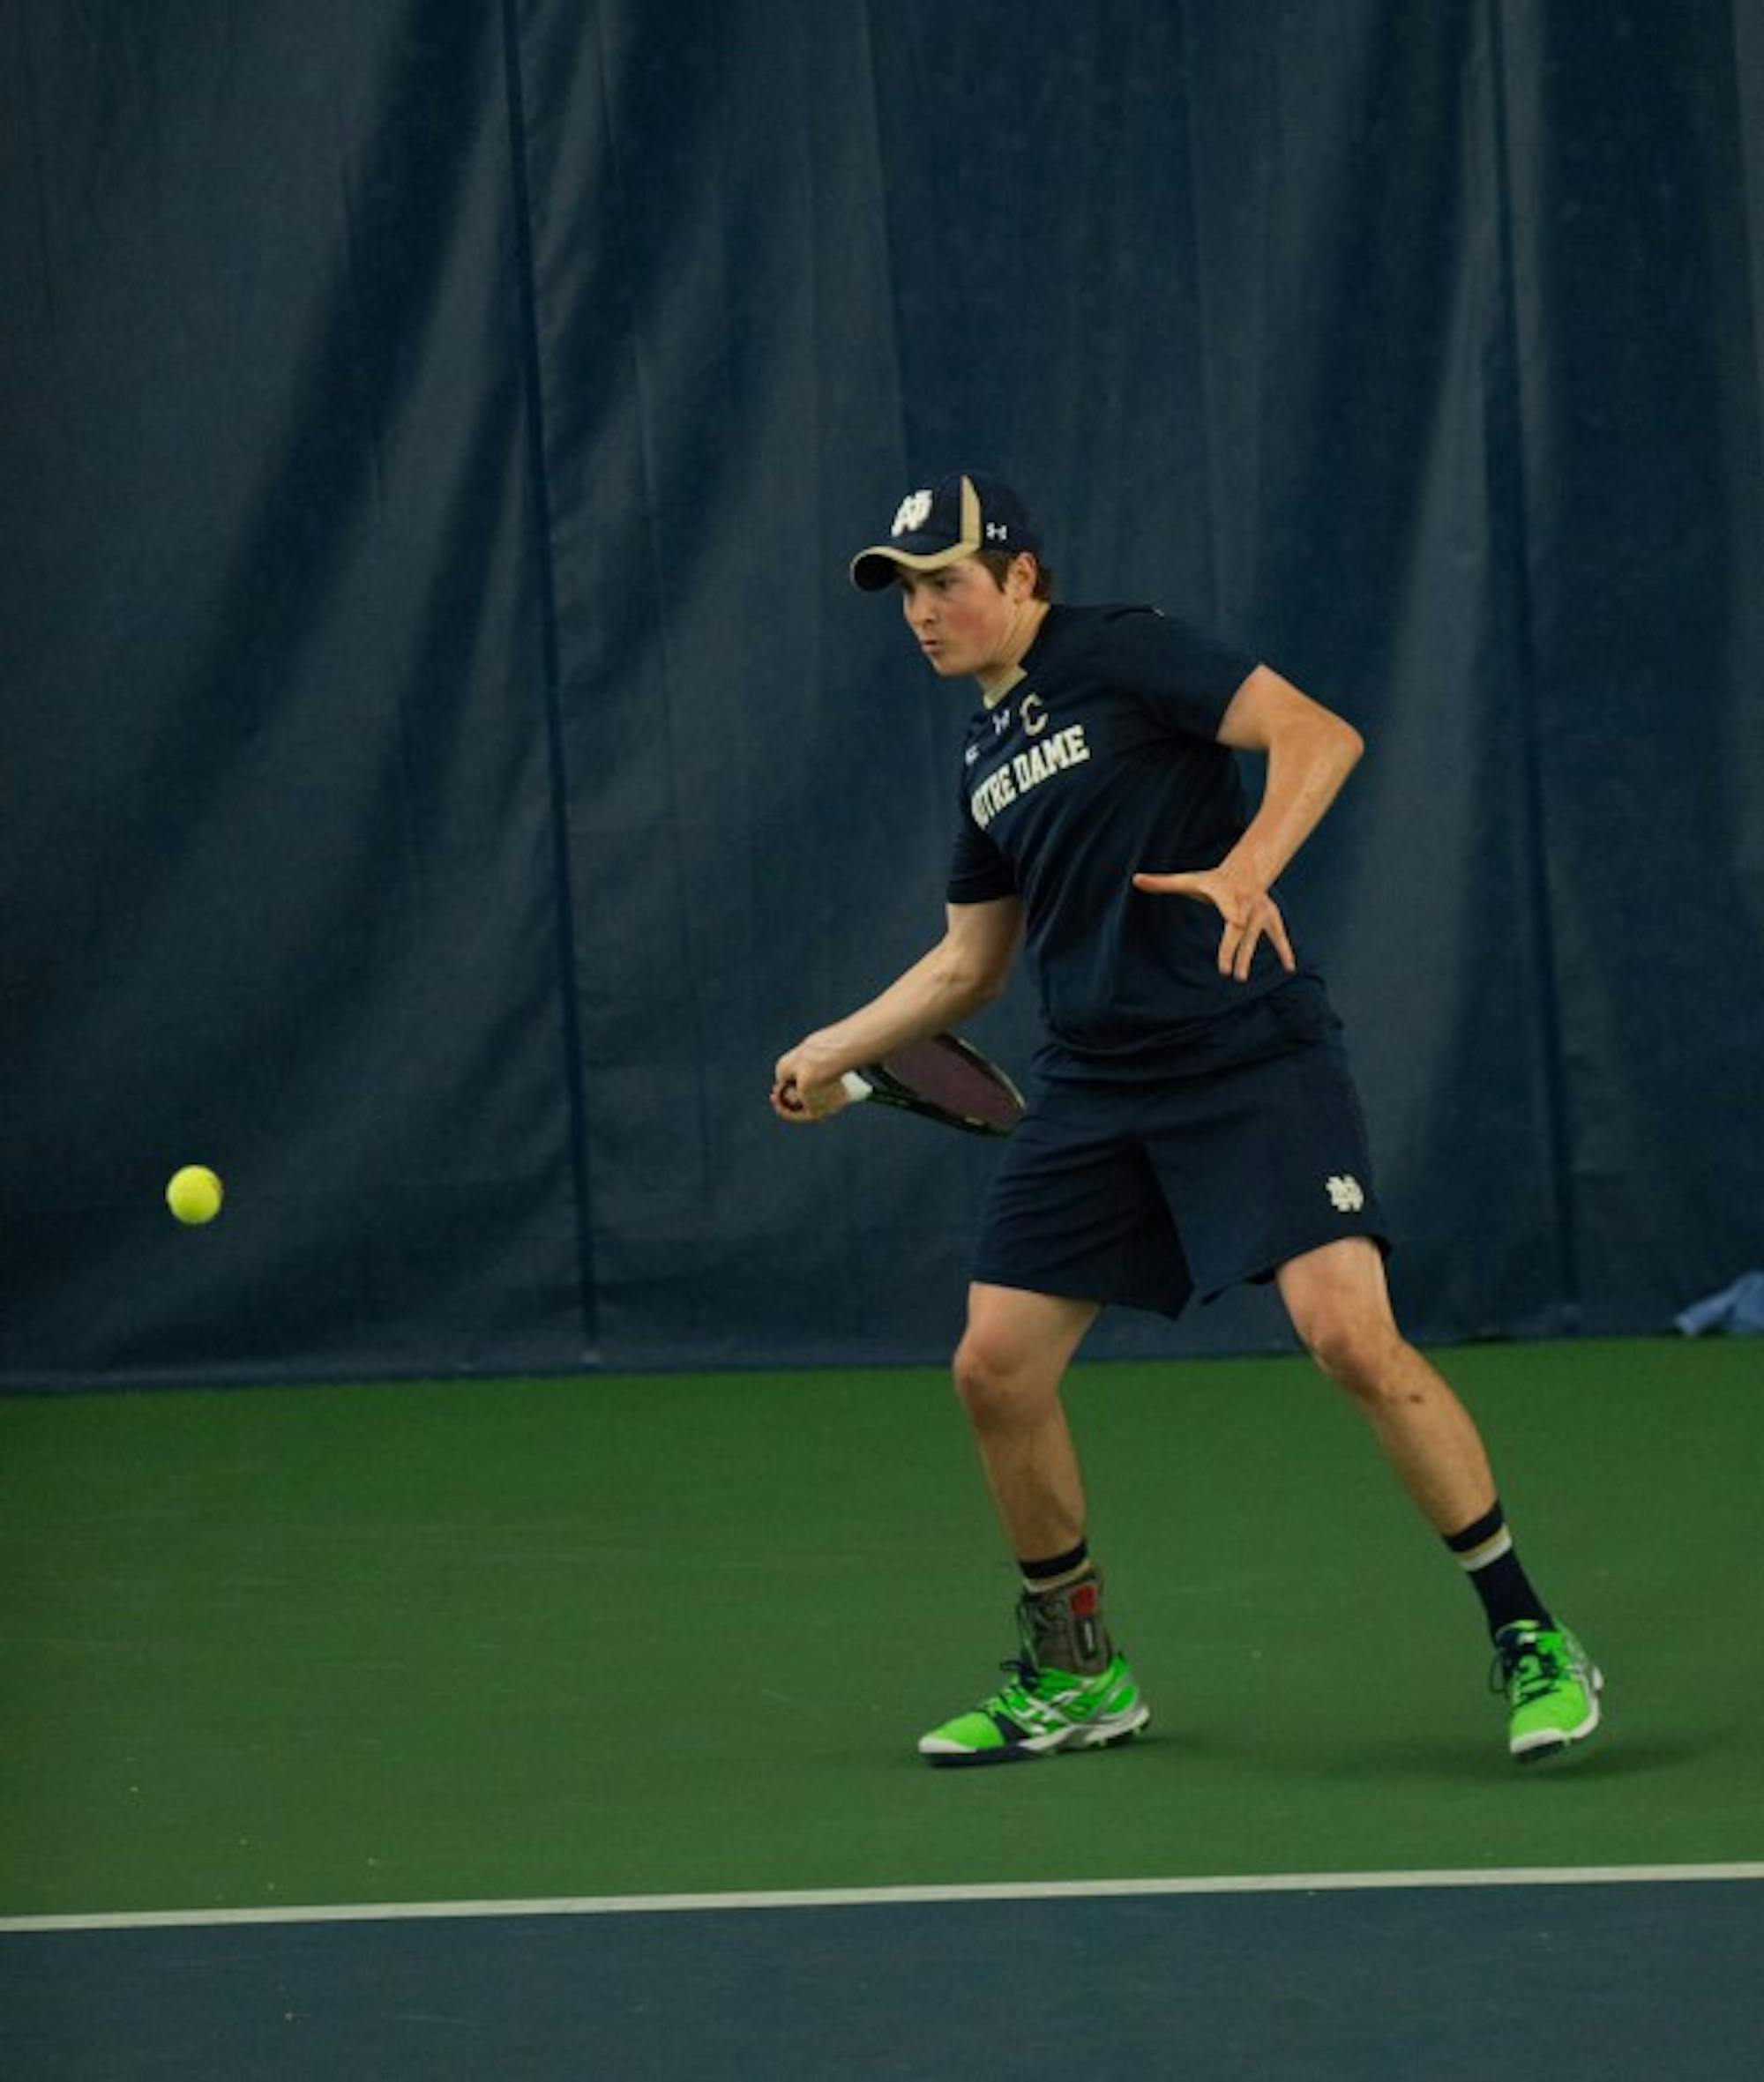 Irish junior captain Eric Schnurrenberger swings at the ball during his Jan. 24 match against Oklahoma State at Eck Tennis Pavilion.